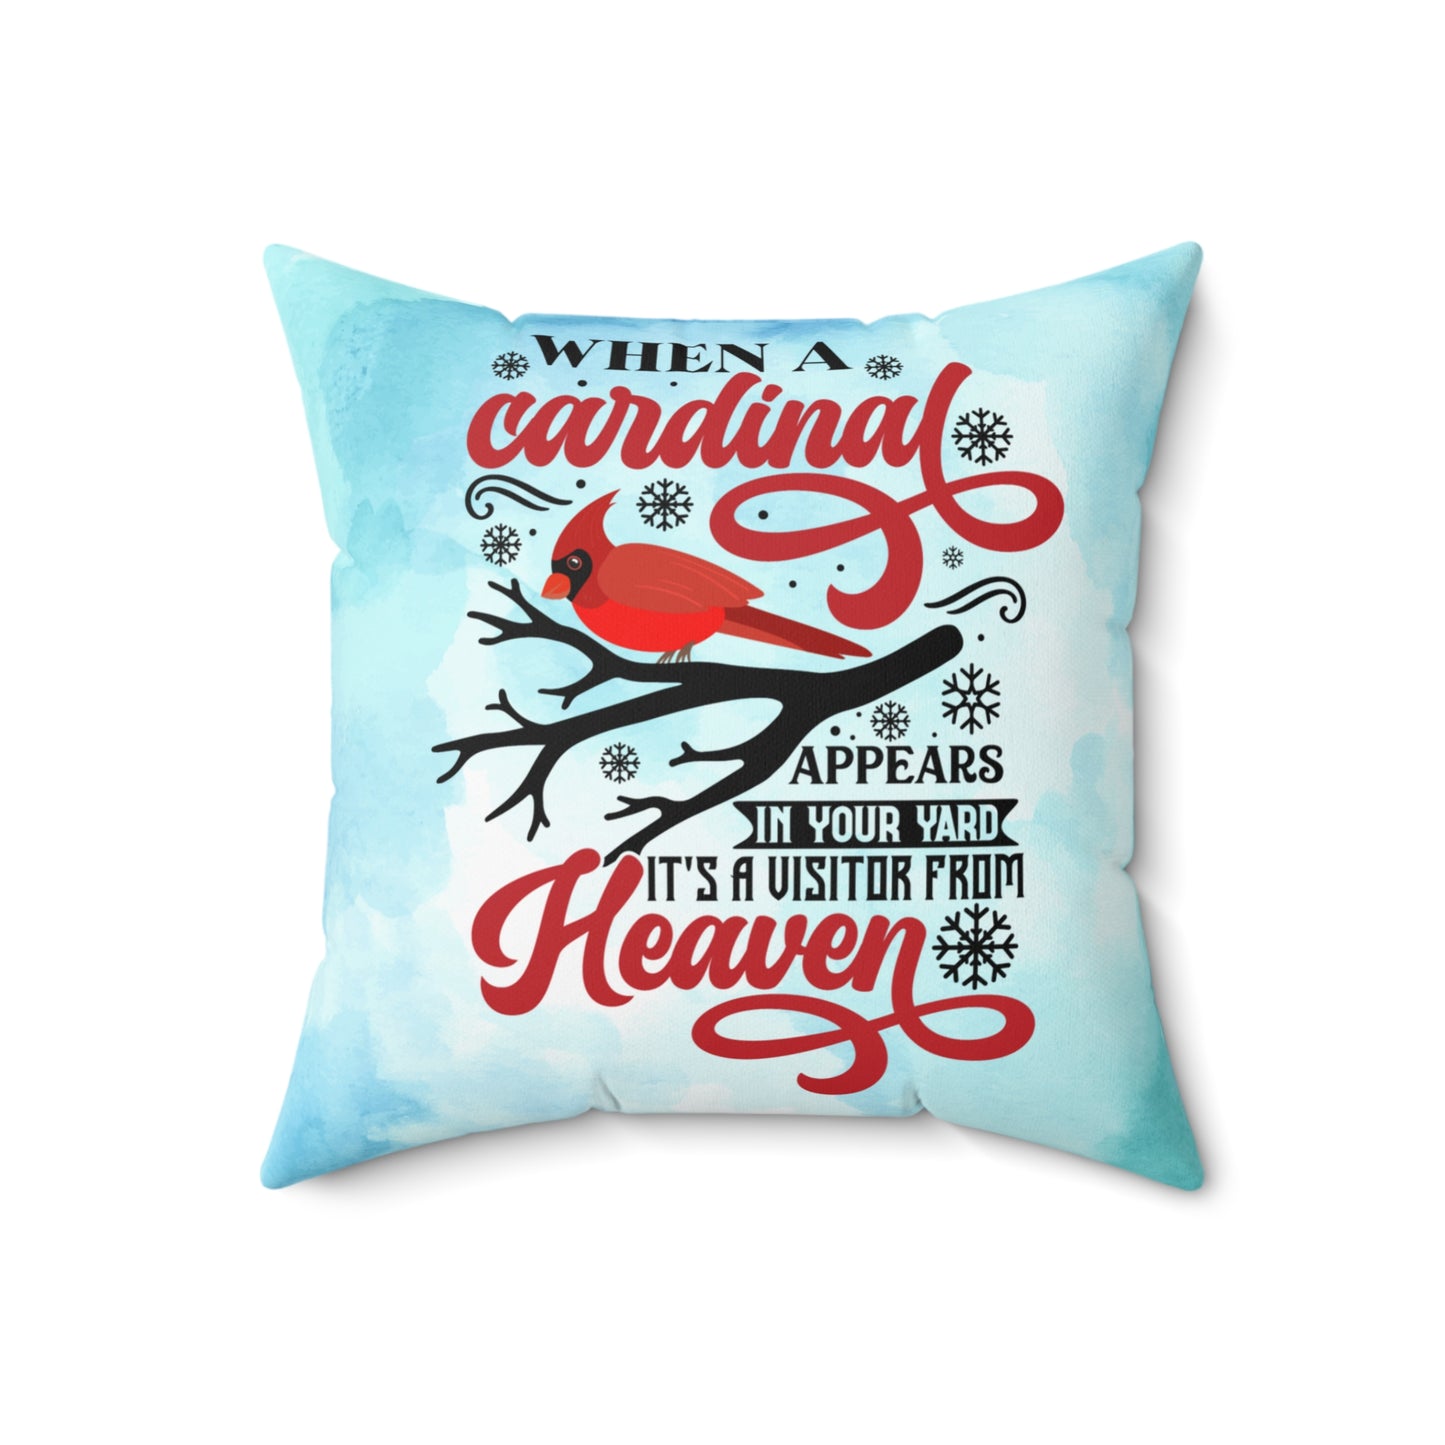 "Visitor From Heaven" Throw Pillow - Weave Got Gifts - Unique Gifts You Won’t Find Anywhere Else!